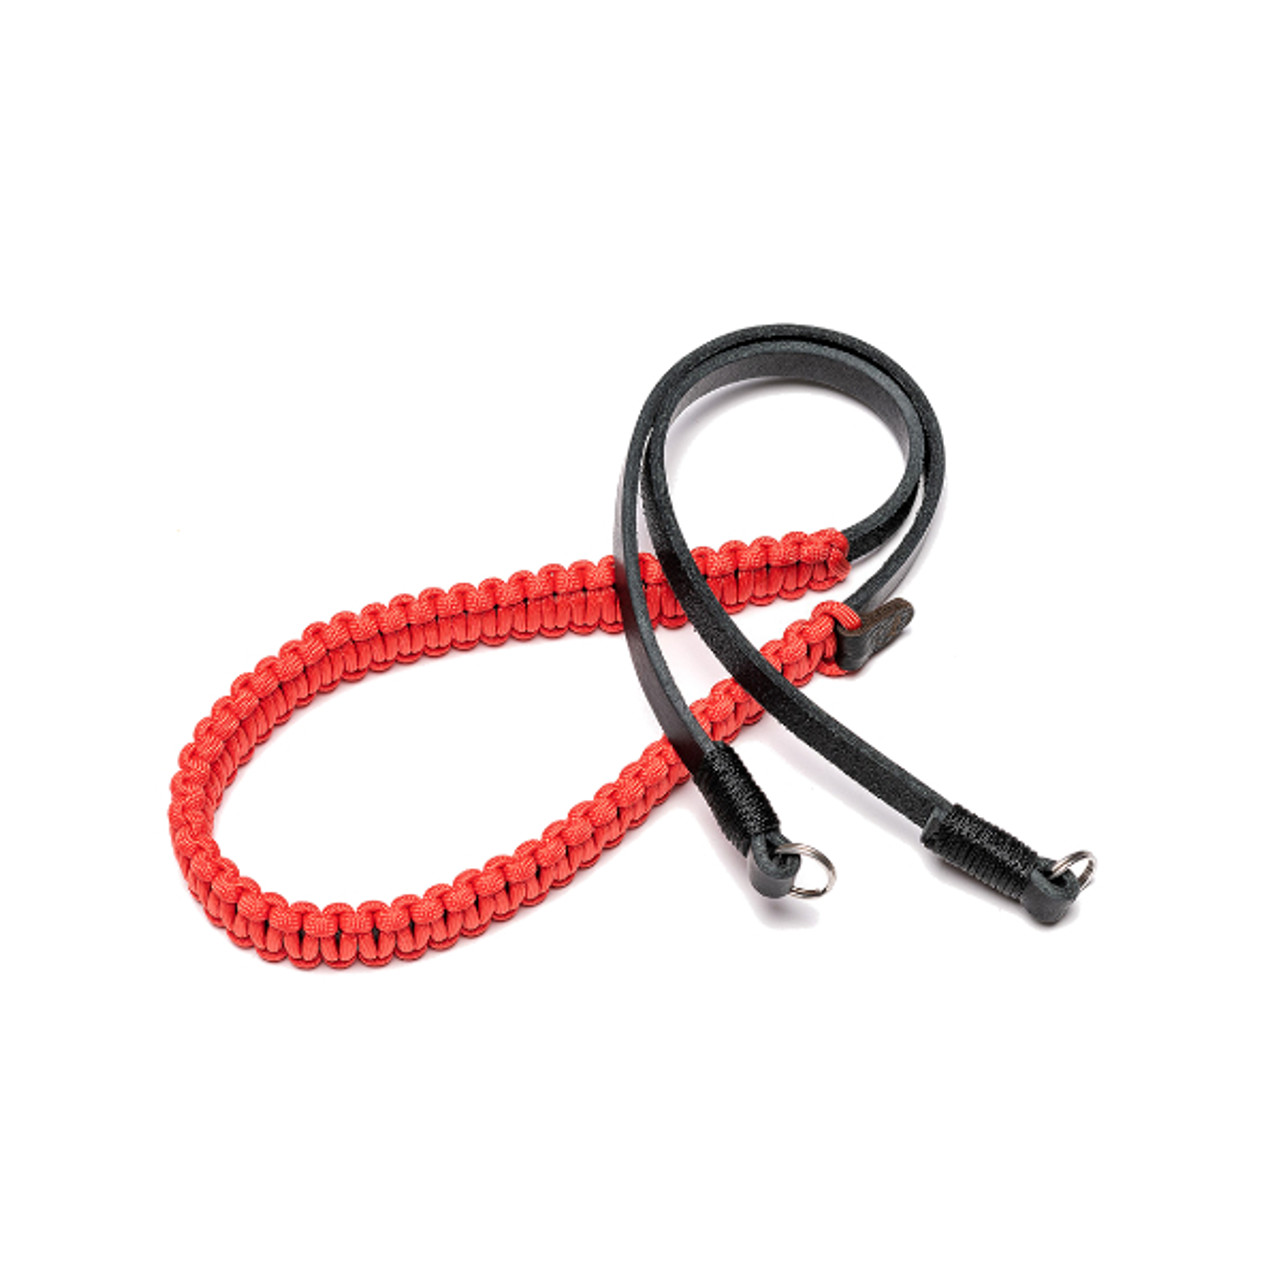 Leica Paracord Strap by COOPH, black/red, 100 cm